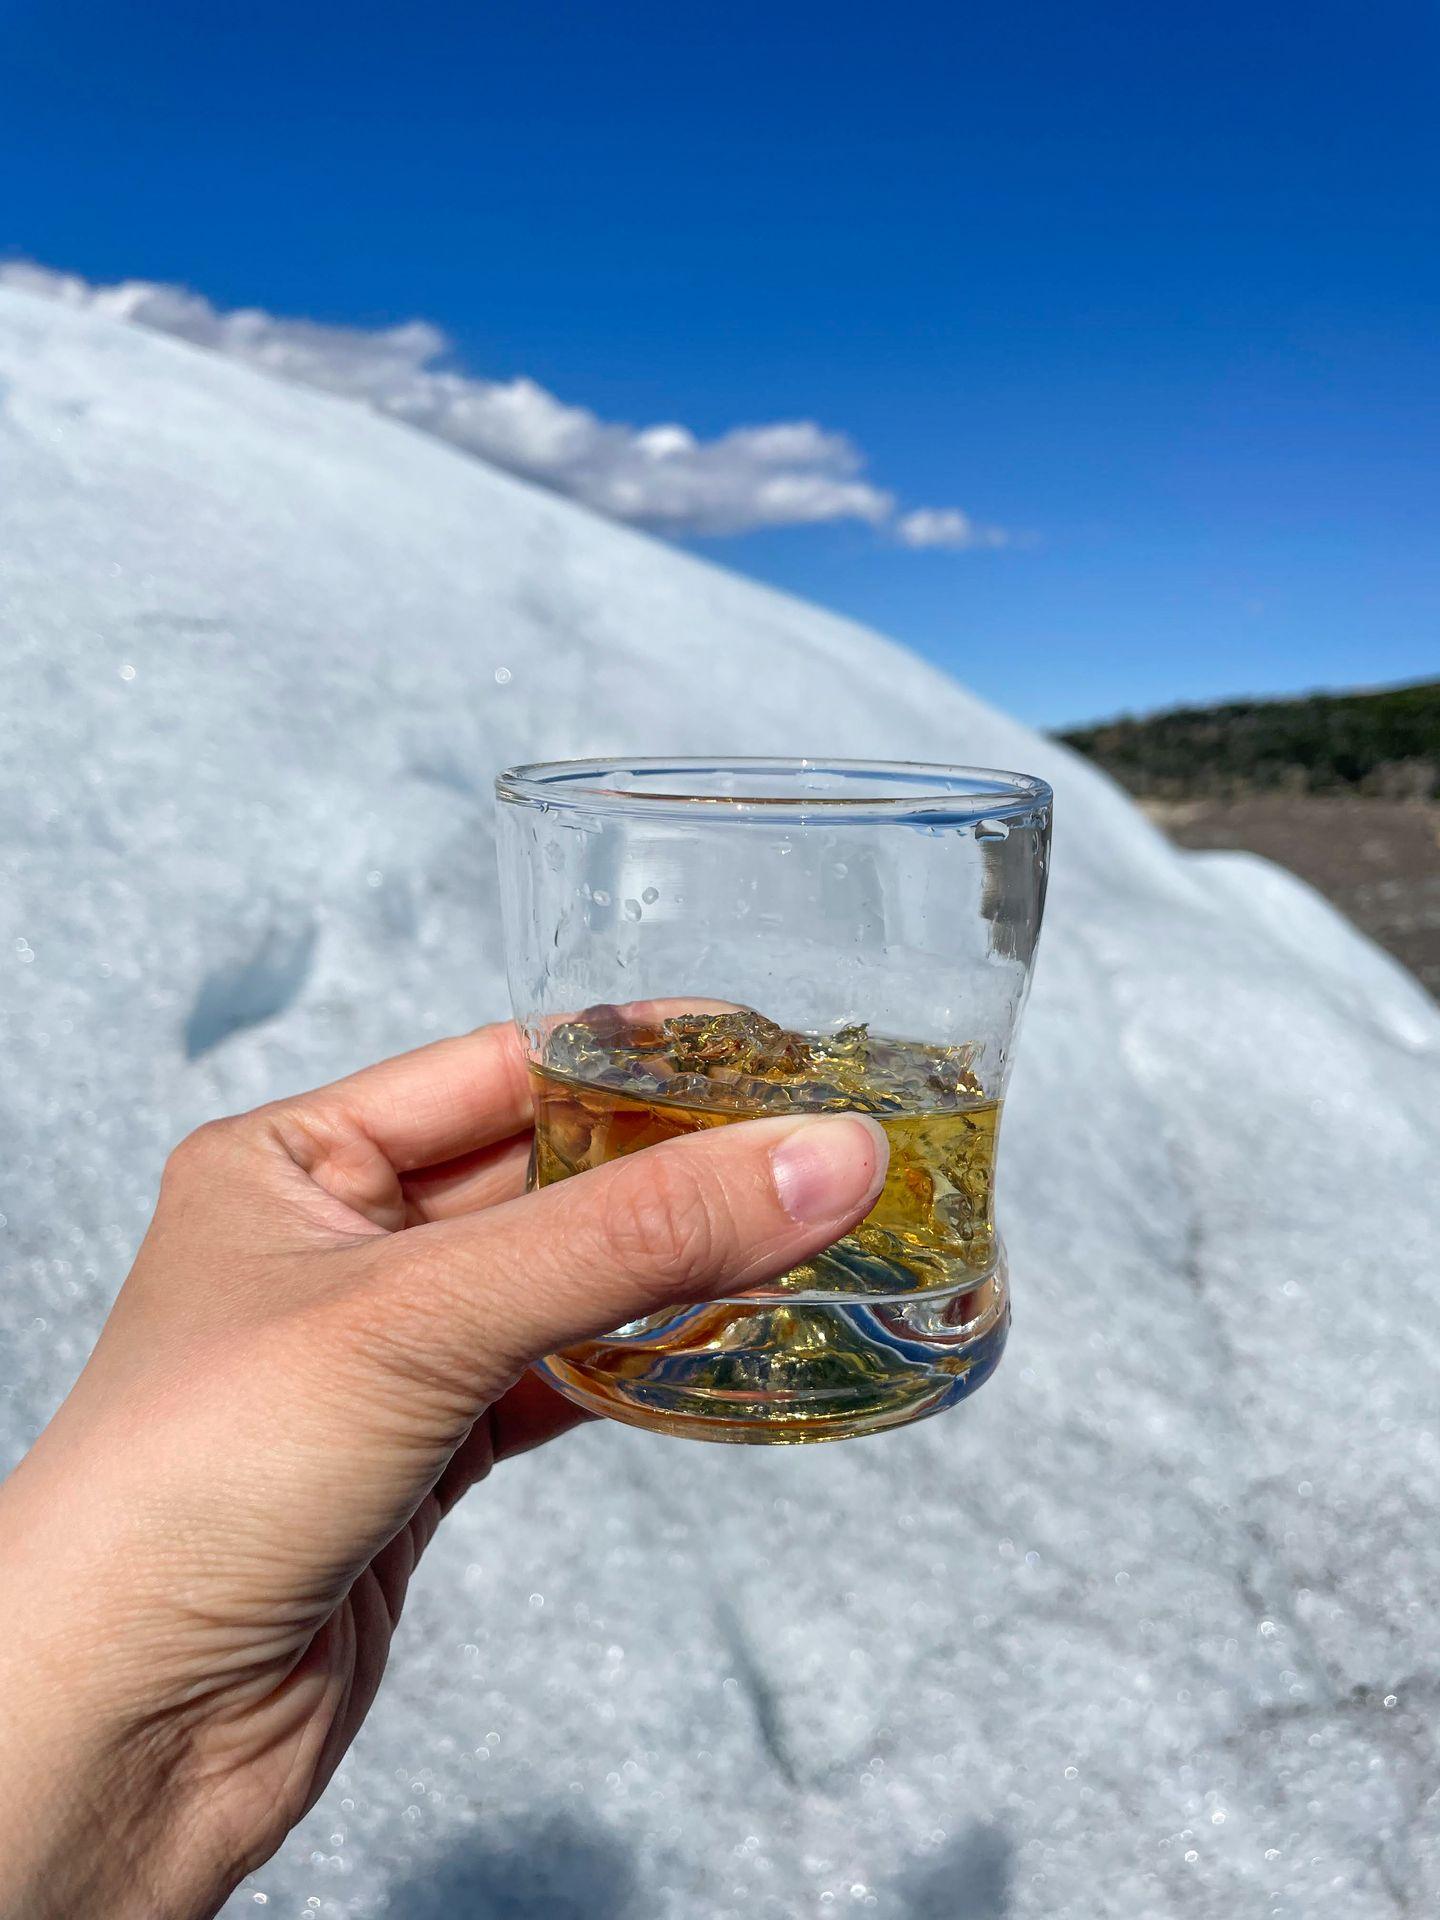 Holding up a glass of whiskey while on a glacier.